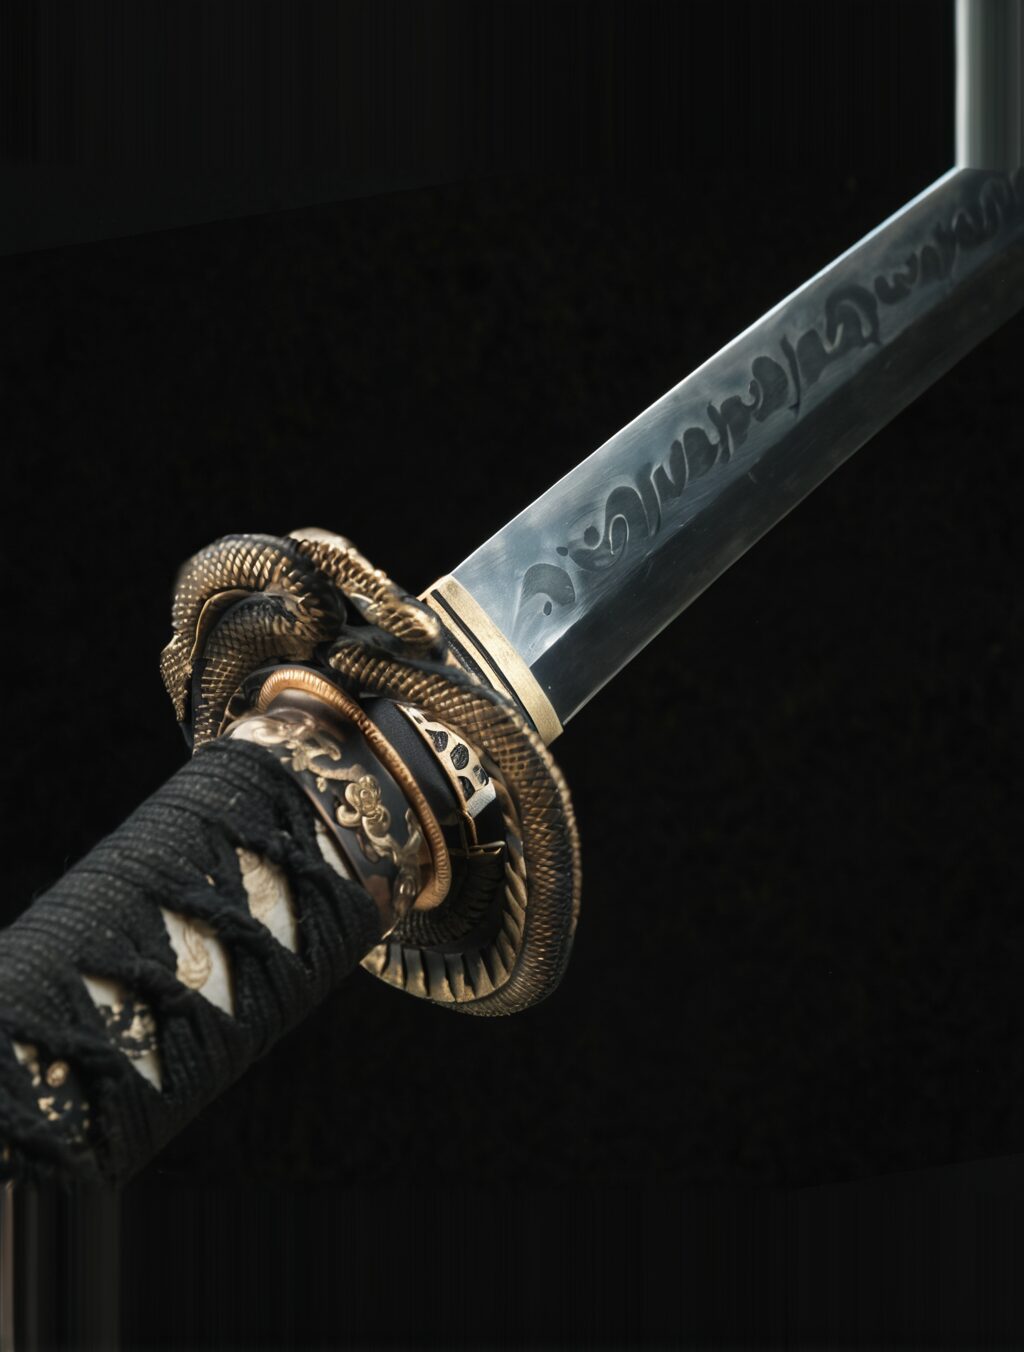 where to buy a real samurai sword in japan